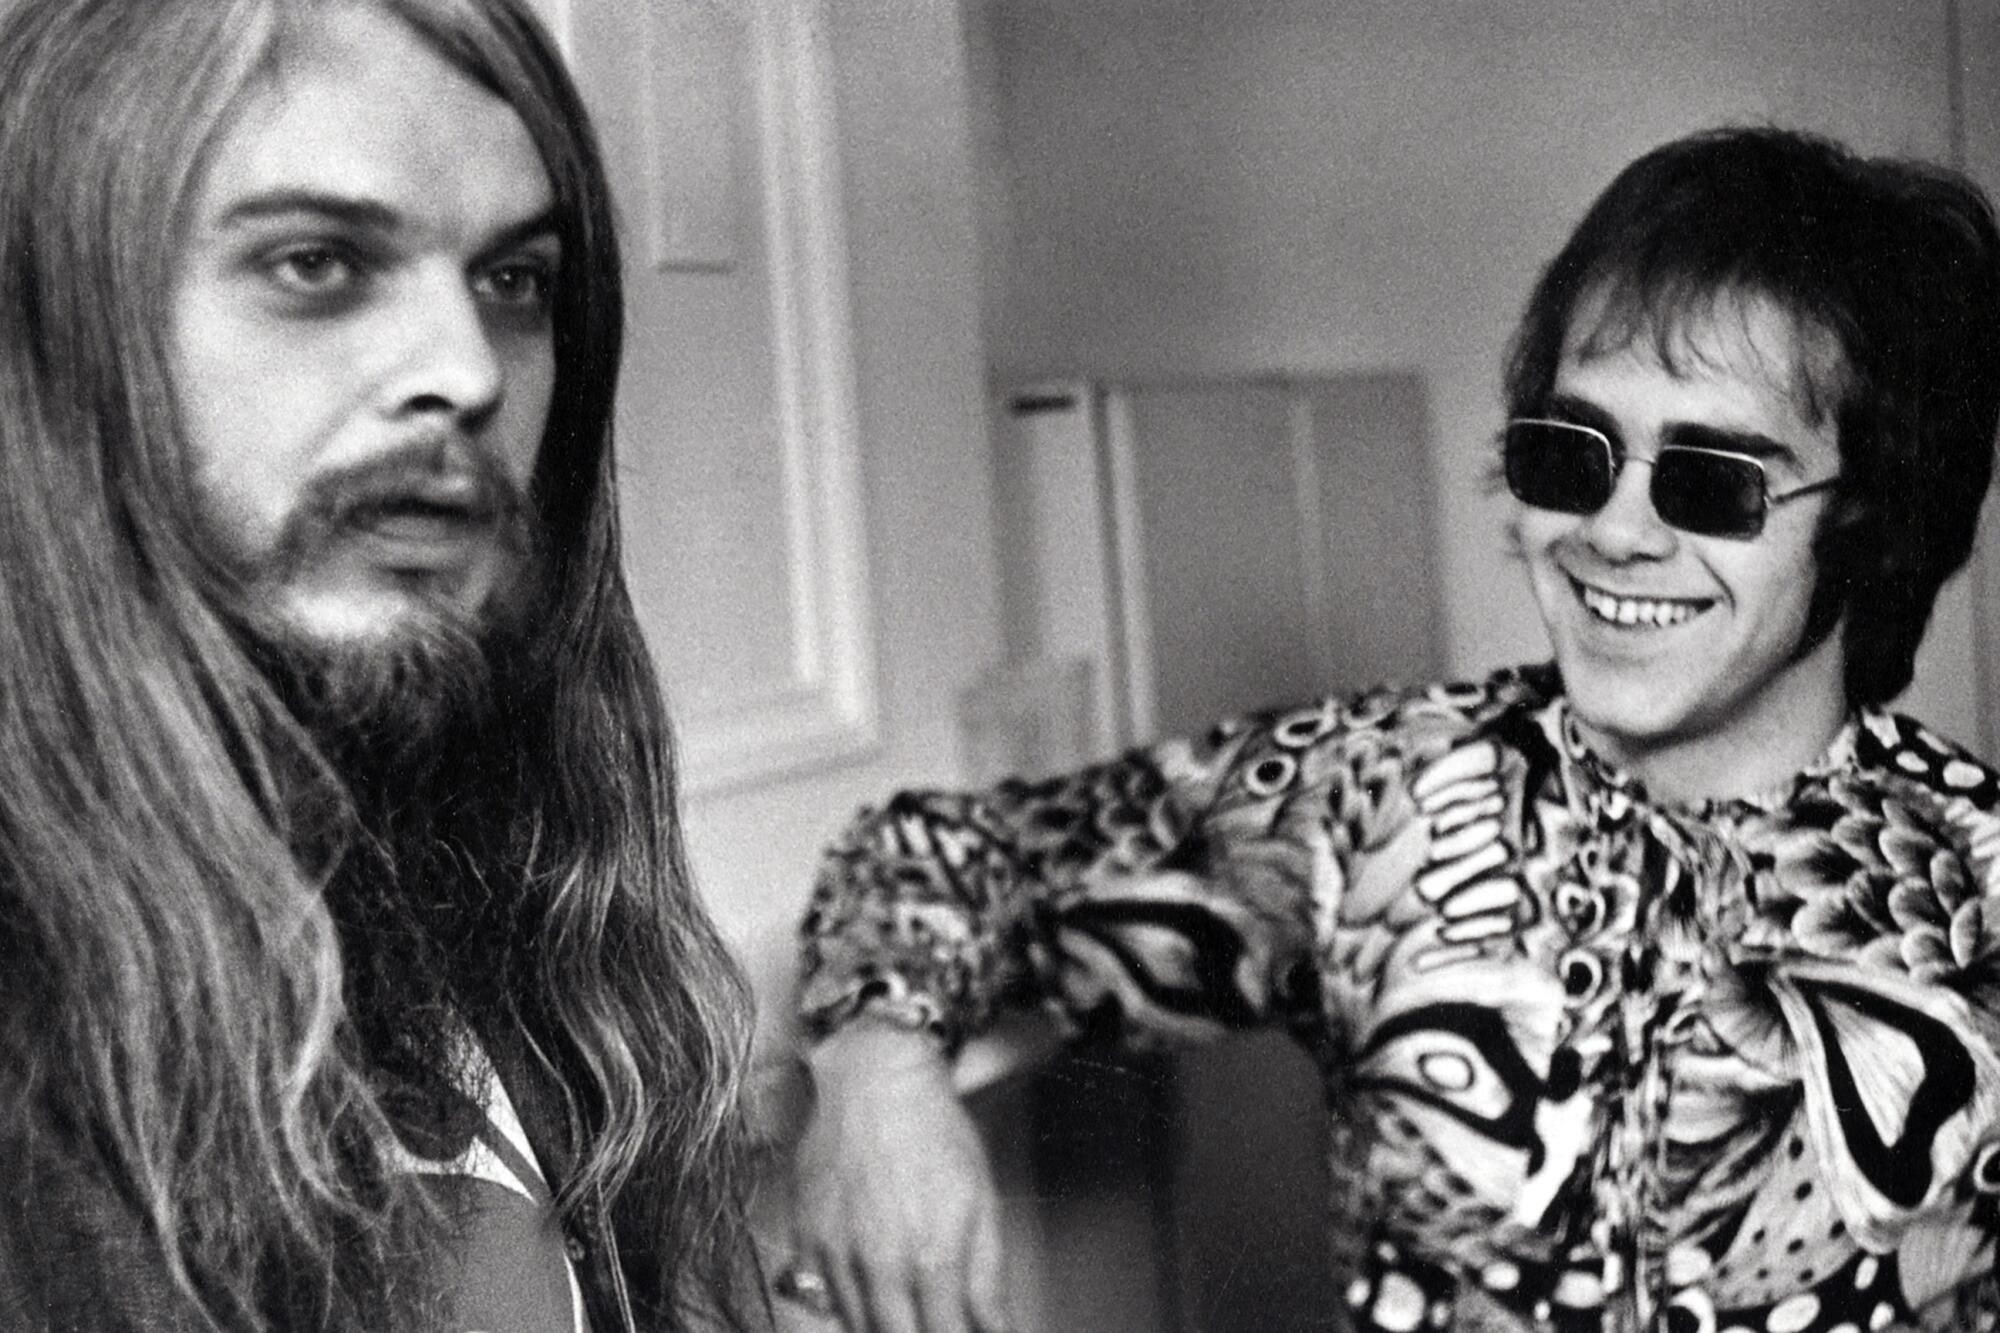 Leon Russell and Elton John smile as they interact.